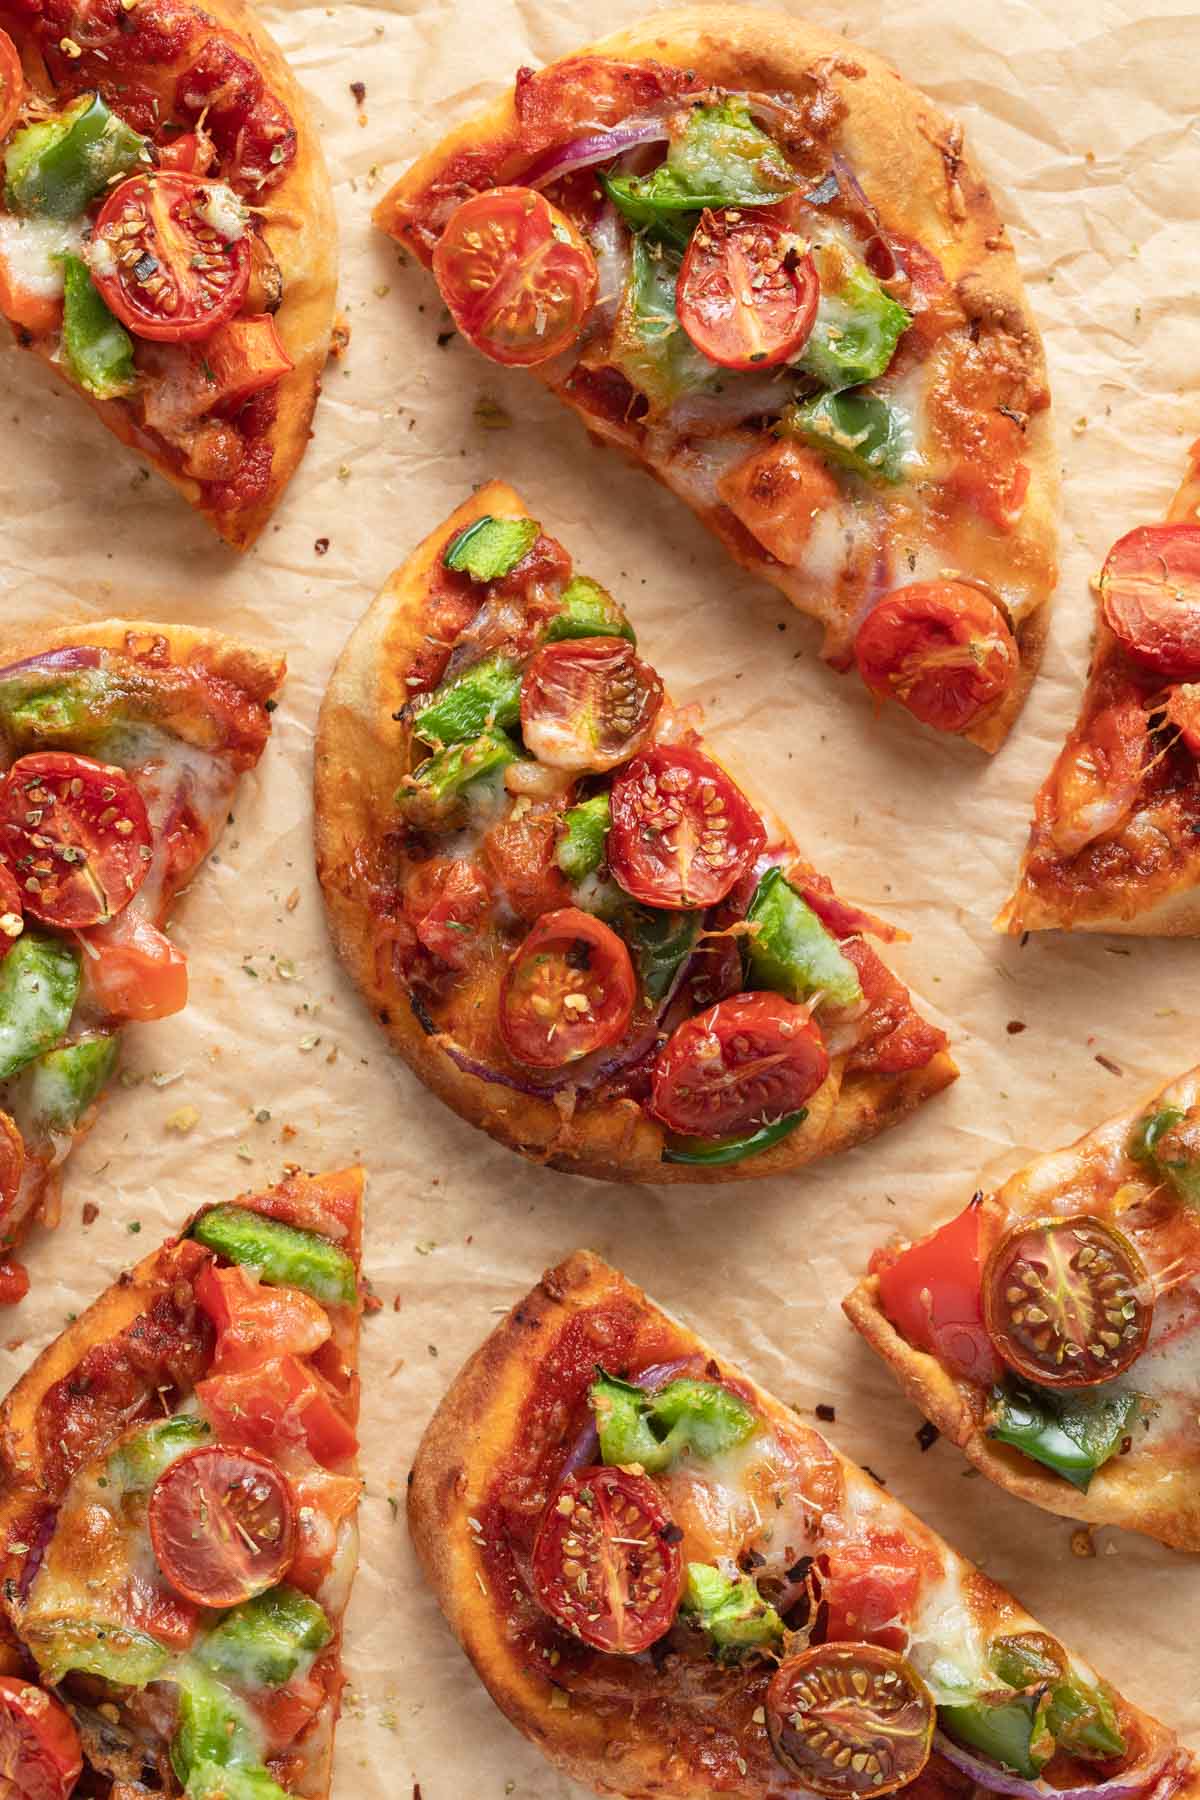 Air fryer mini pizzas made with naan bread and arranged on a sheet of parchment paper.